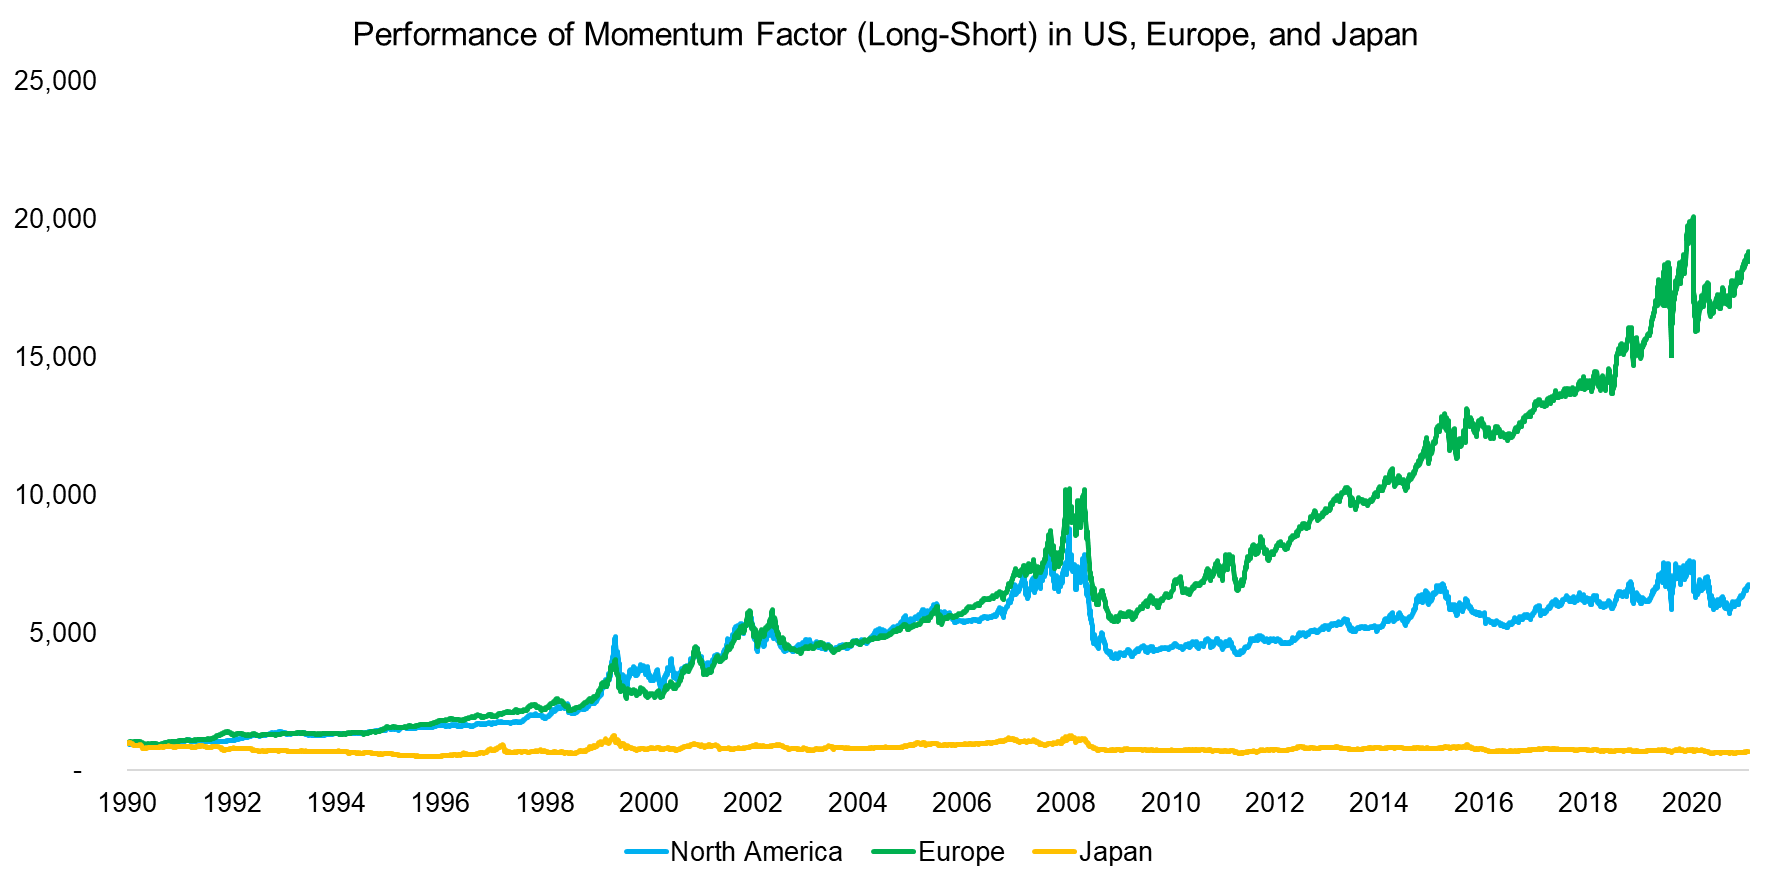 Performance of Momentum Factor (Long-Short) in US, Europe, and Japan